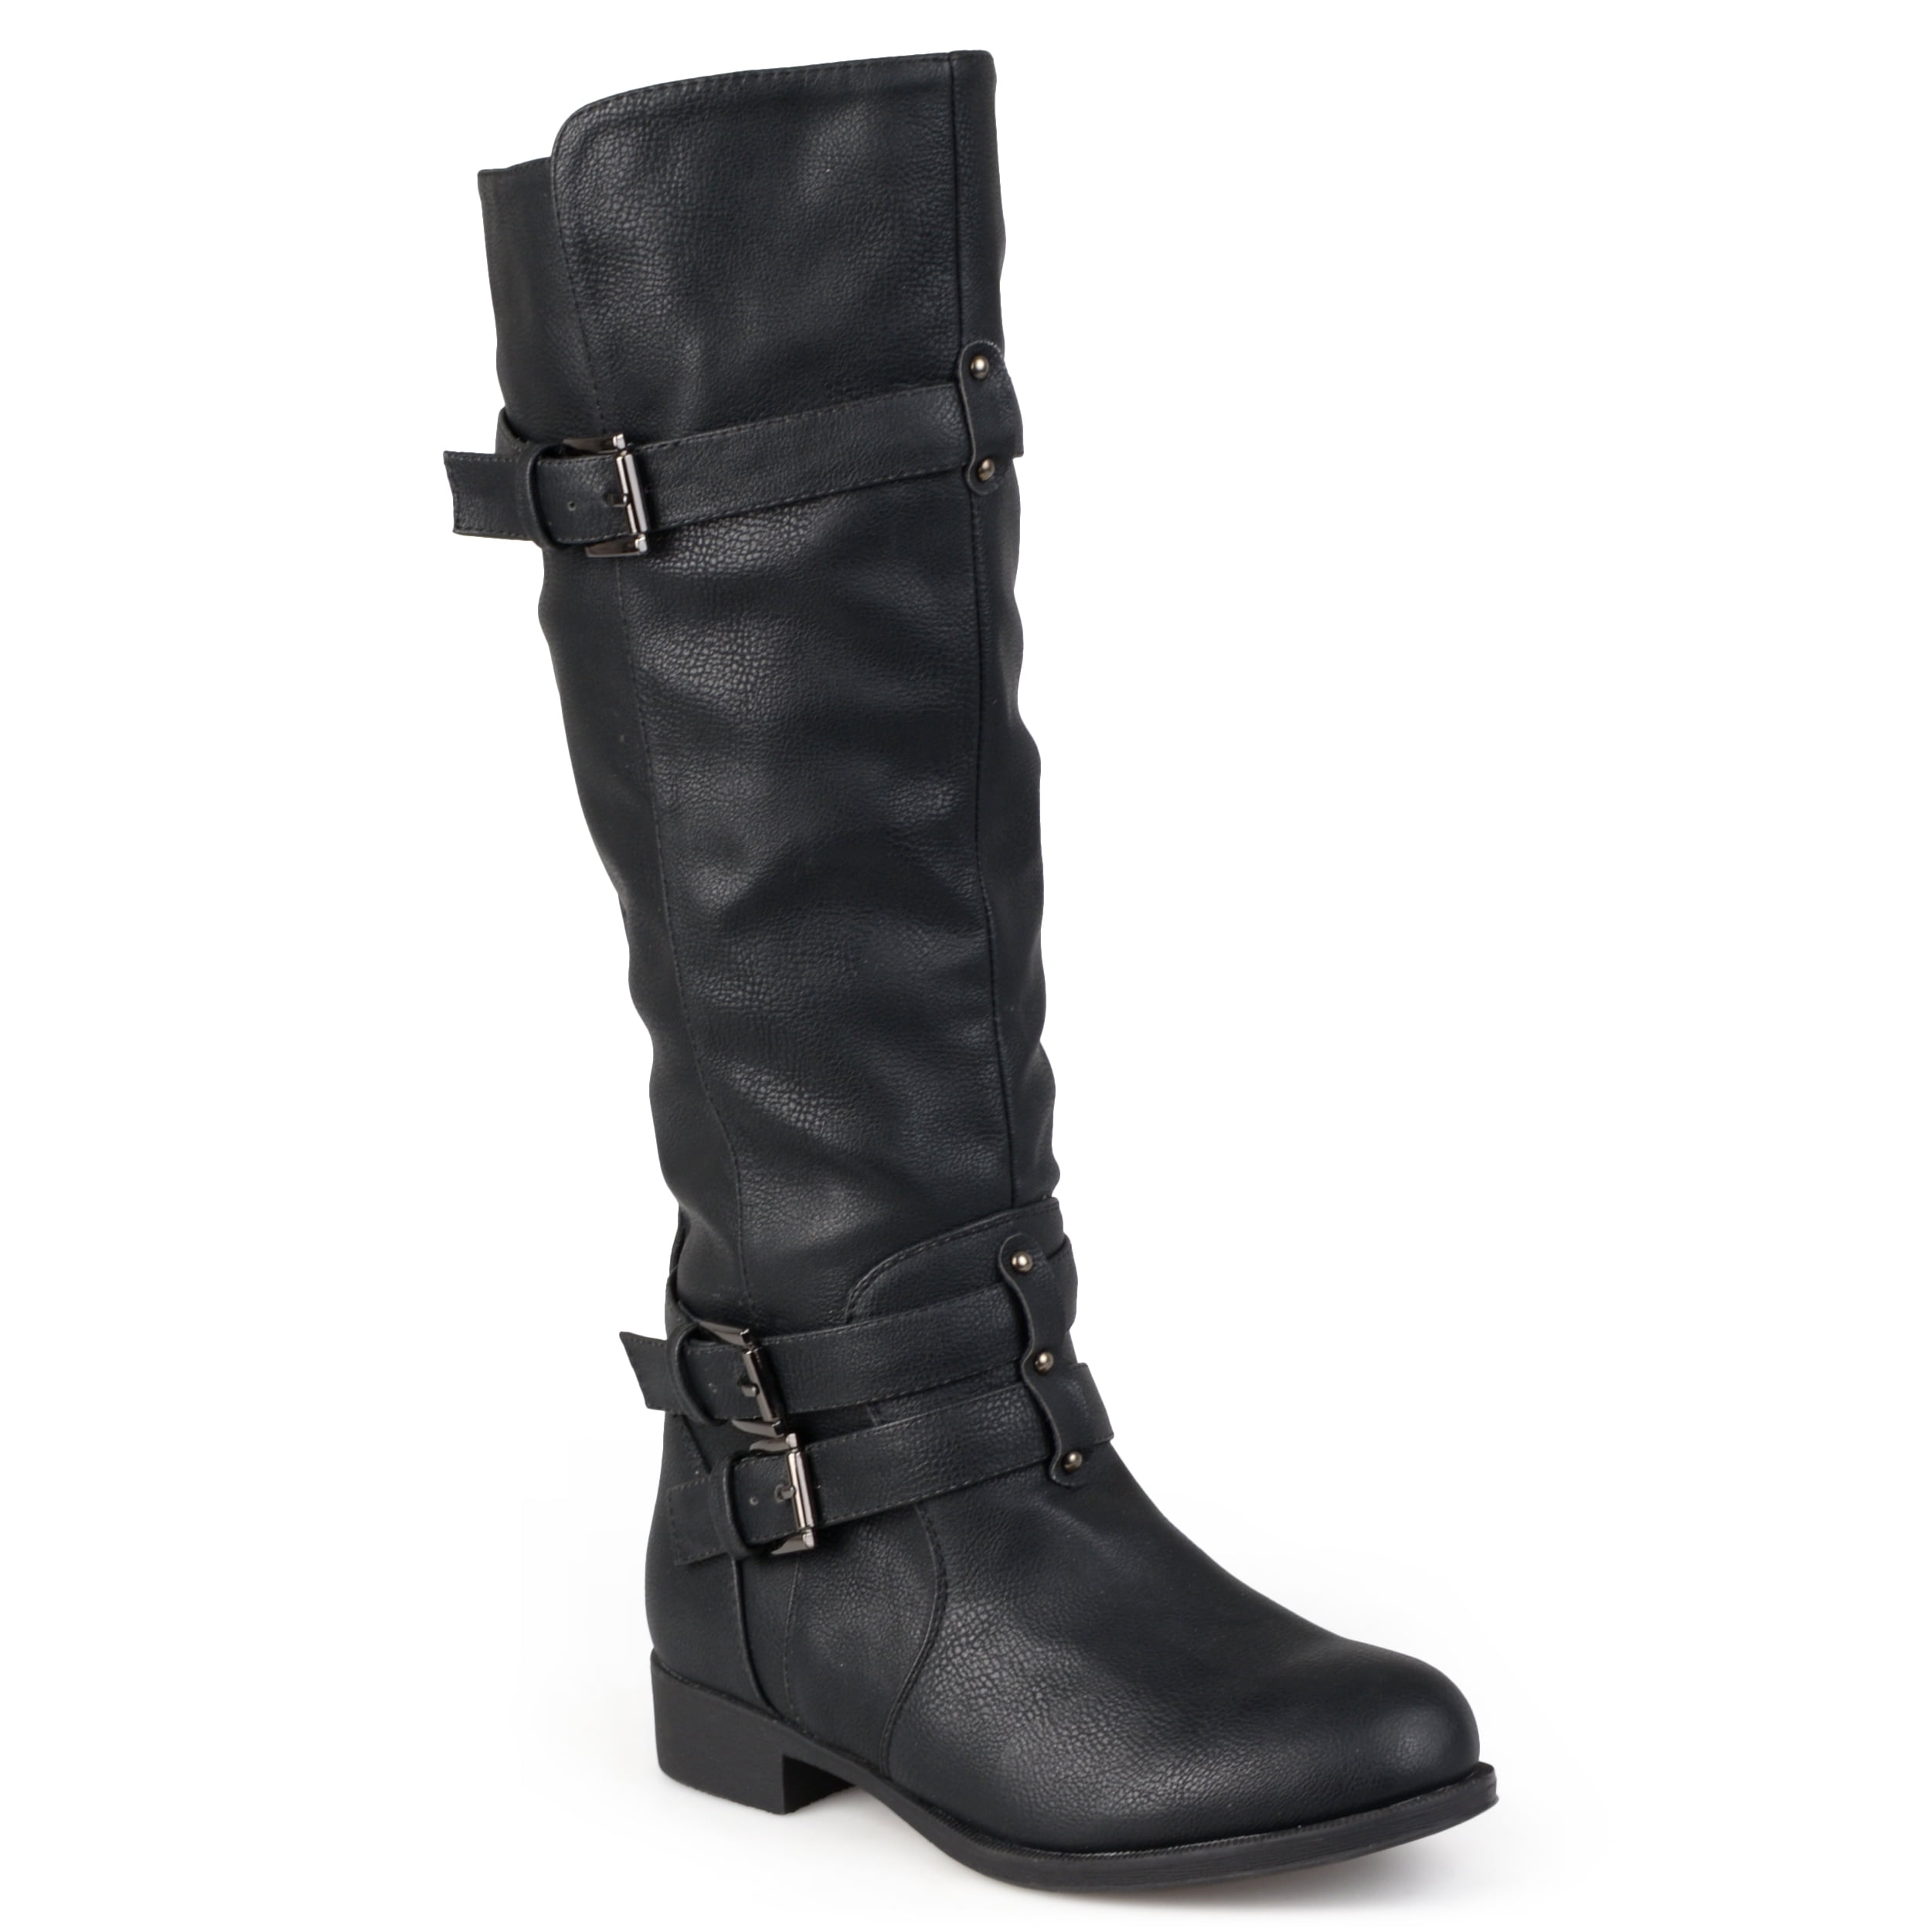 American Women's Eagle Knee High Strap Buckles Maggie Riding Boots Shoes